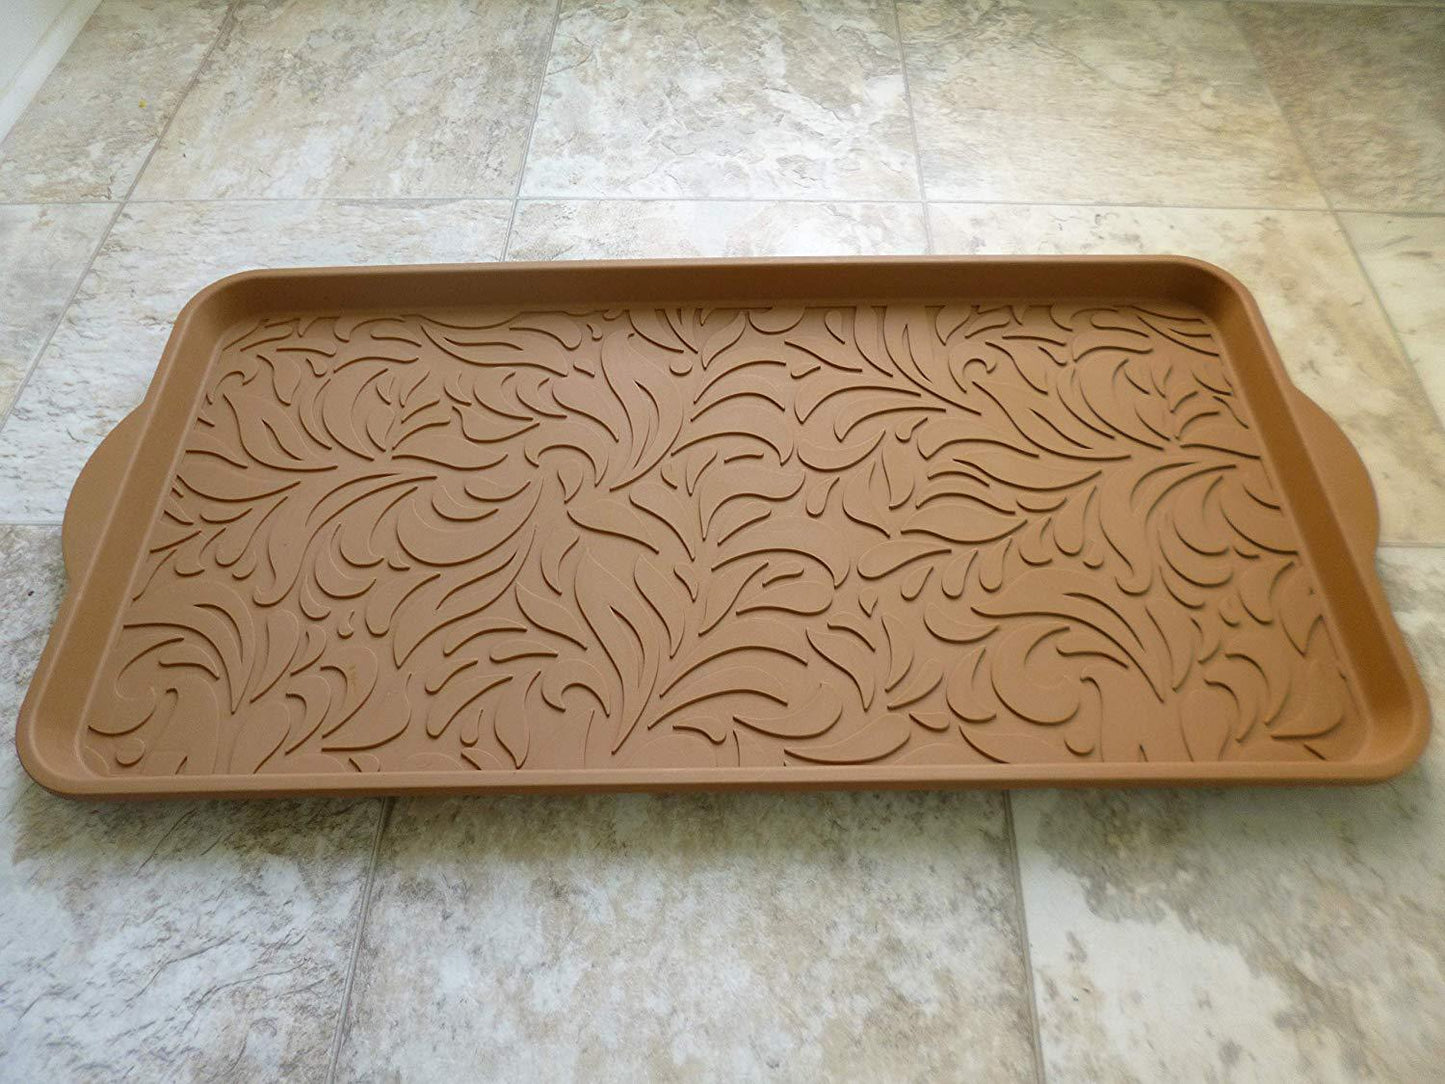 Decorative Multi Purpose Tray, Large 15X29inch (Camel Brown), Waterproof Entryway Organizer for Shoes Boots, Floor Protector for Pet Bowls, Litter Box, Plants, Trunk Cabinet Liner